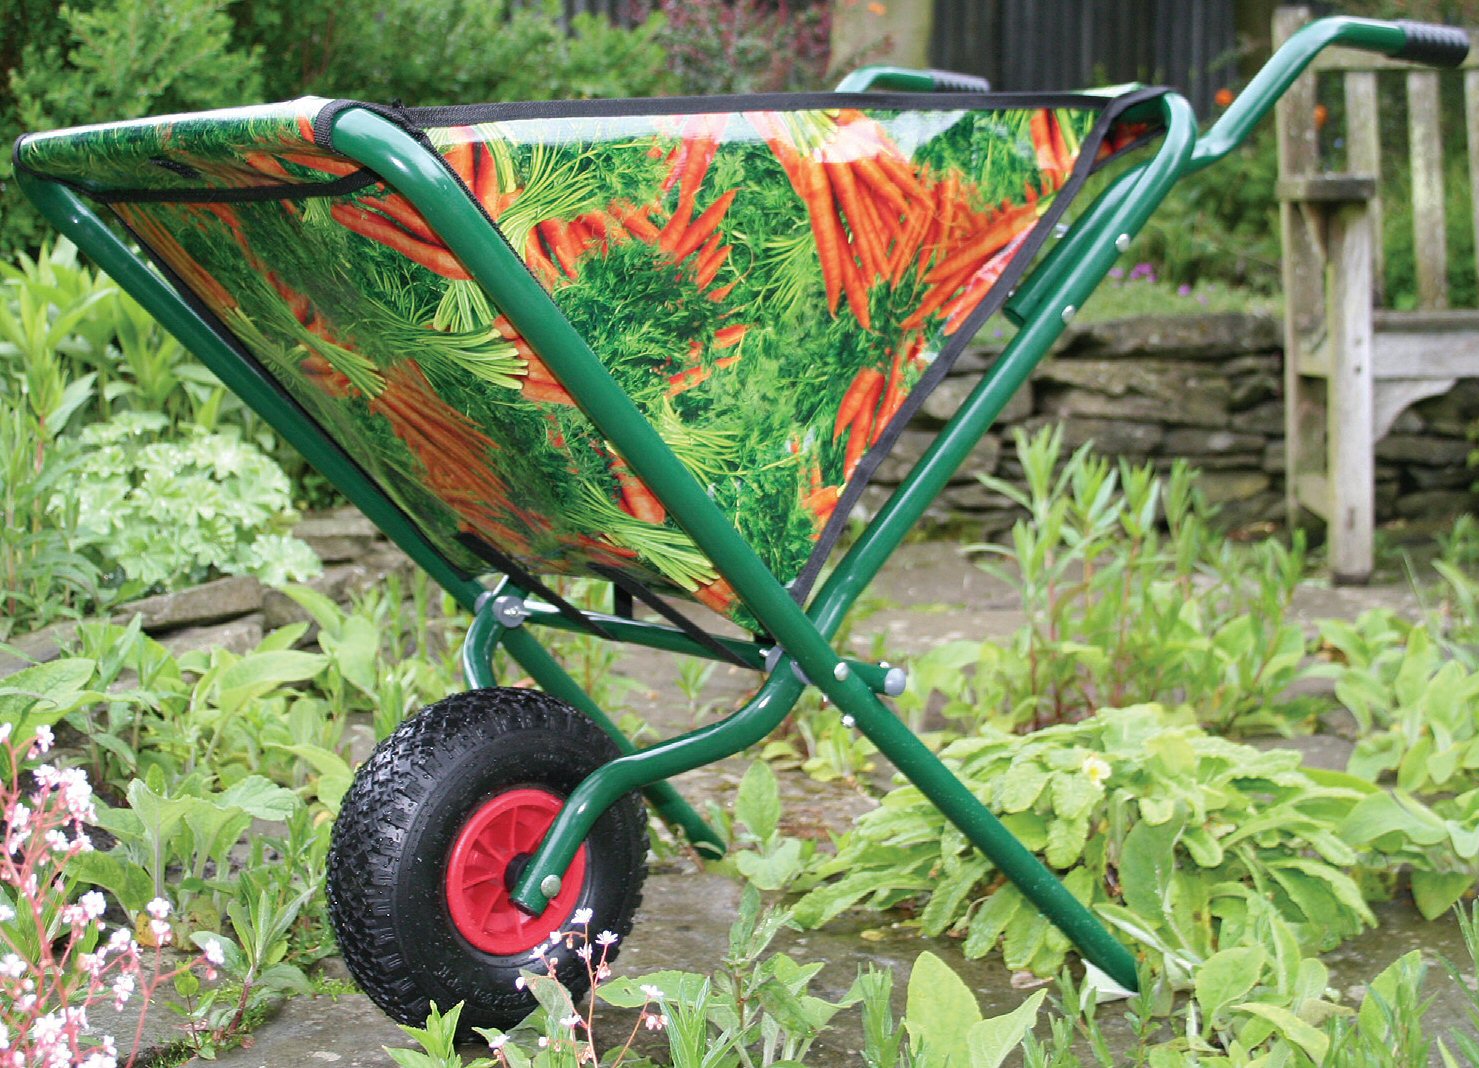 This folding wheelbarrow with its distinctive carrot print design is a great addition to any garden.